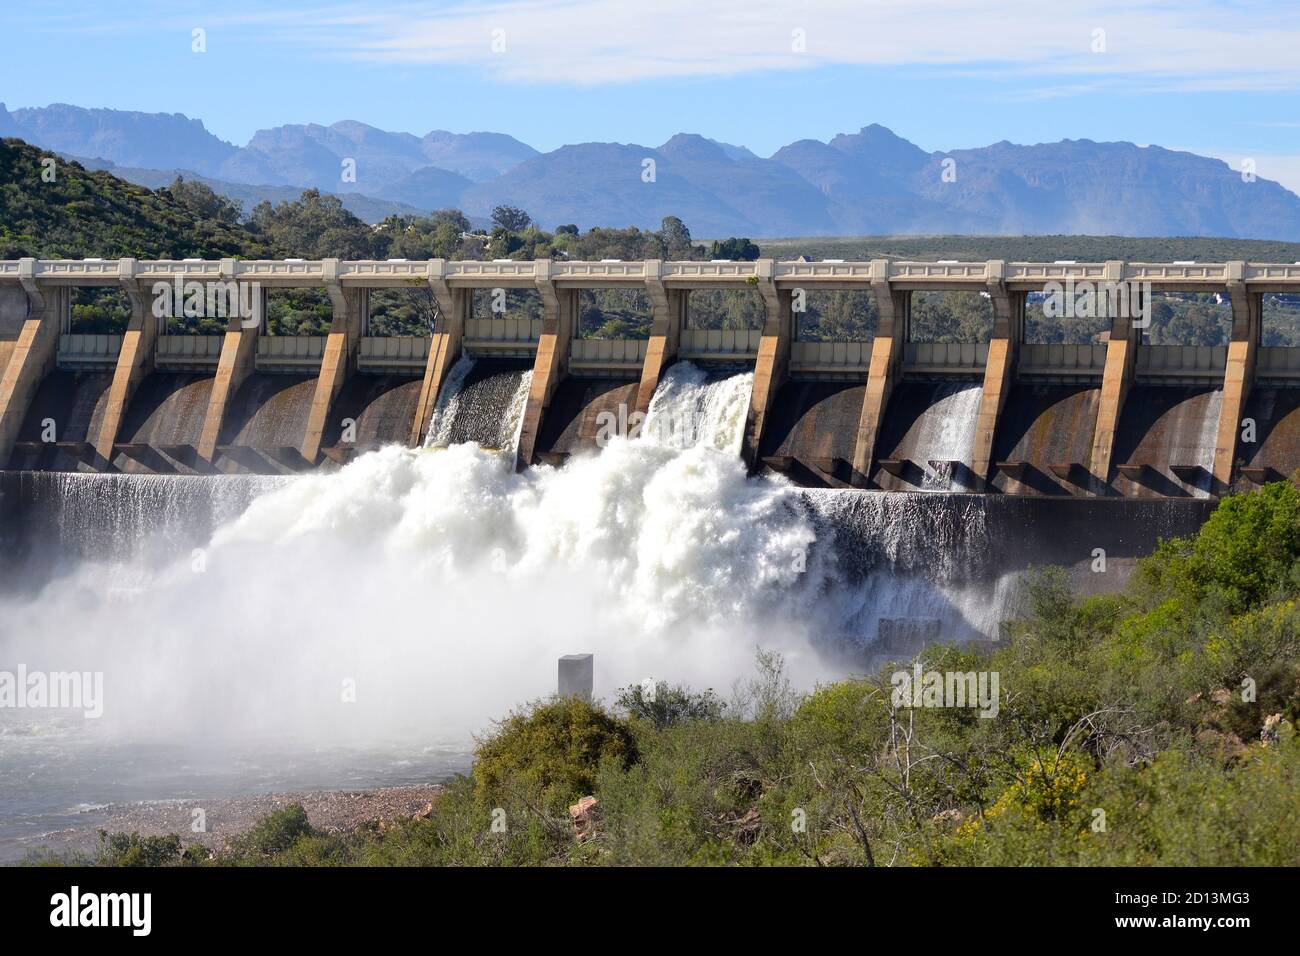 Sluices are opened at the Clanwilliam Dam in the Western Cape, South Africa to release excess water Stock Photo